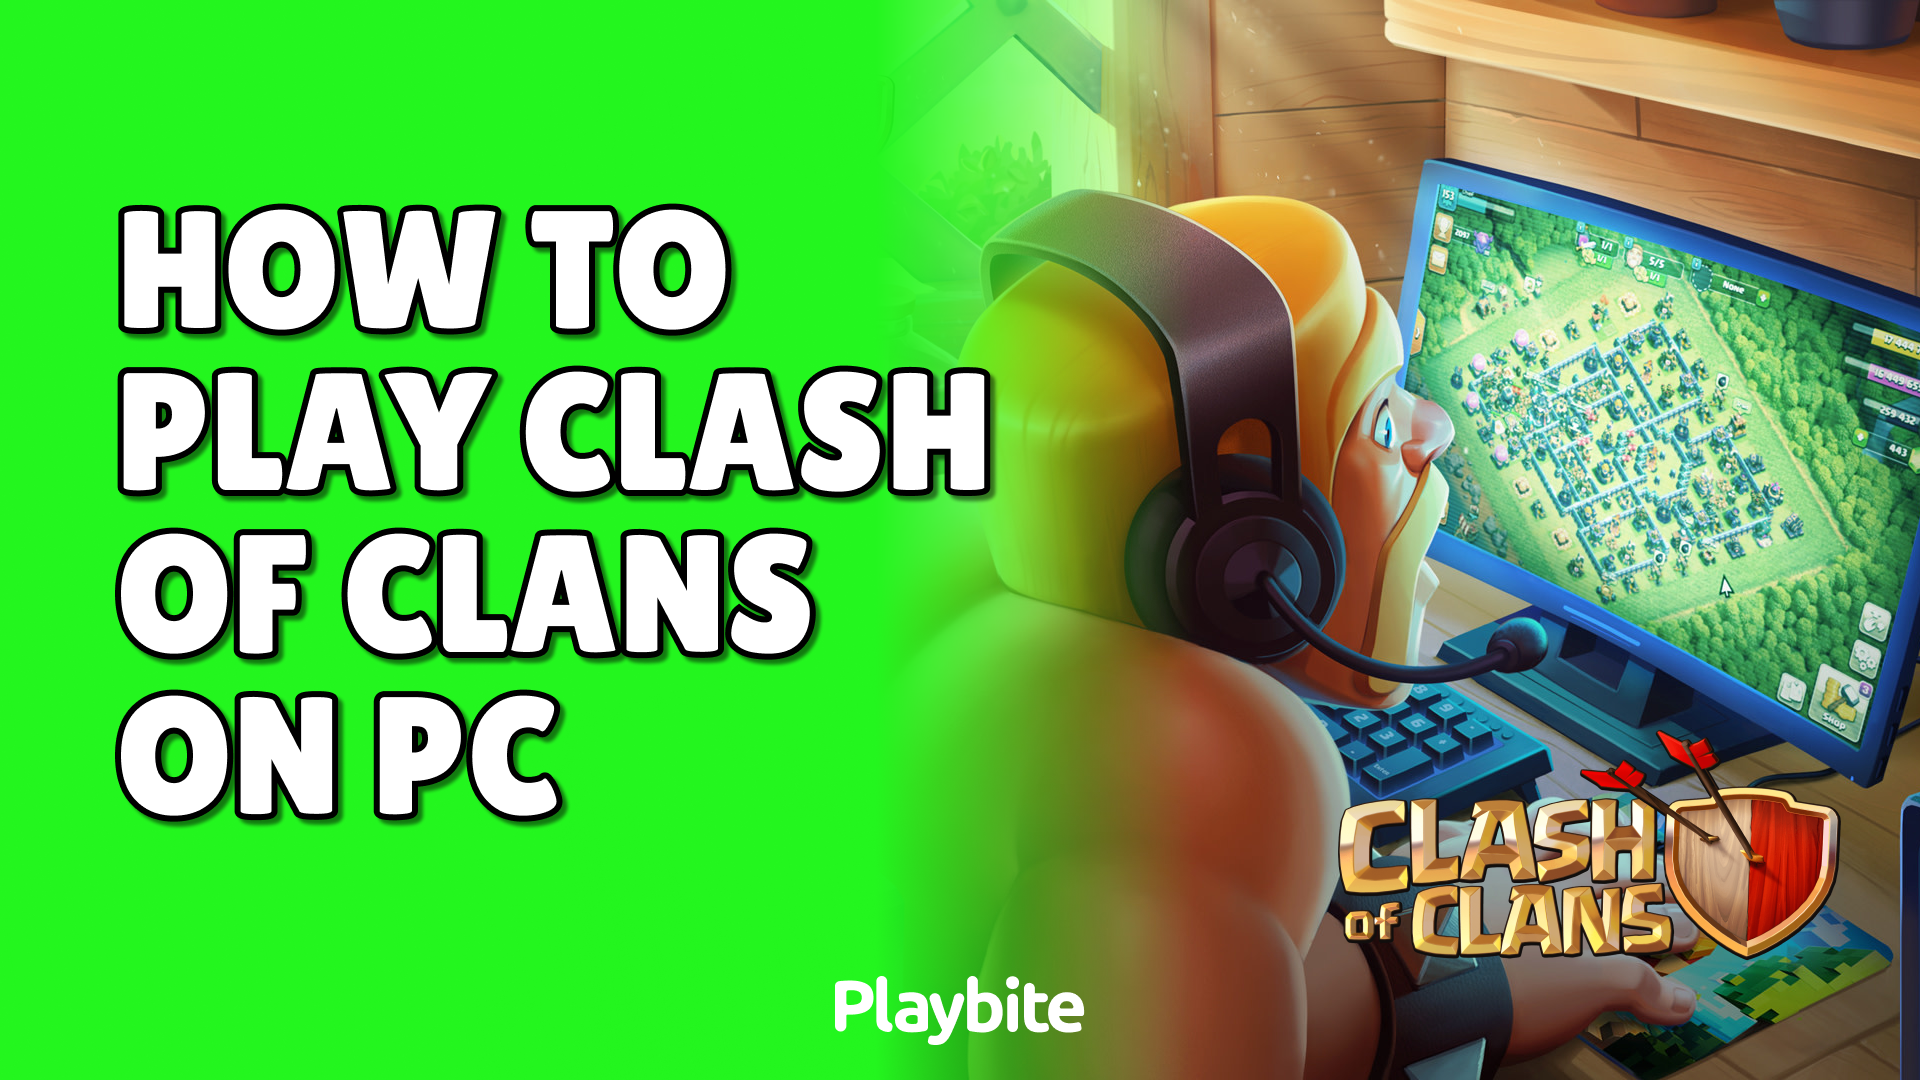 How To Play Clash Of Clans On PC